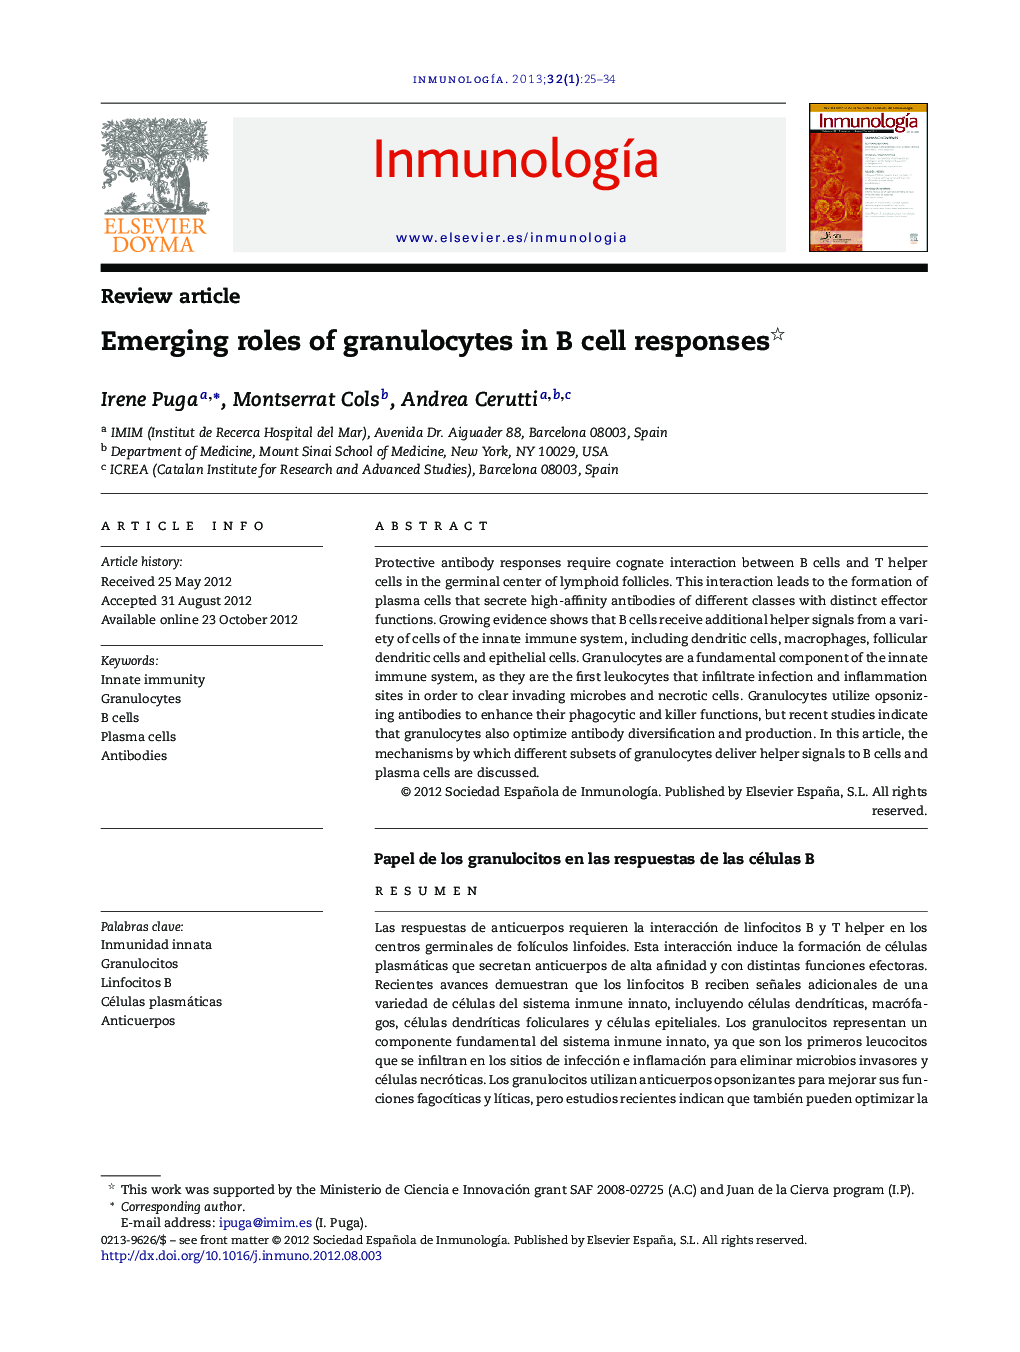 Emerging roles of granulocytes in B cell responses